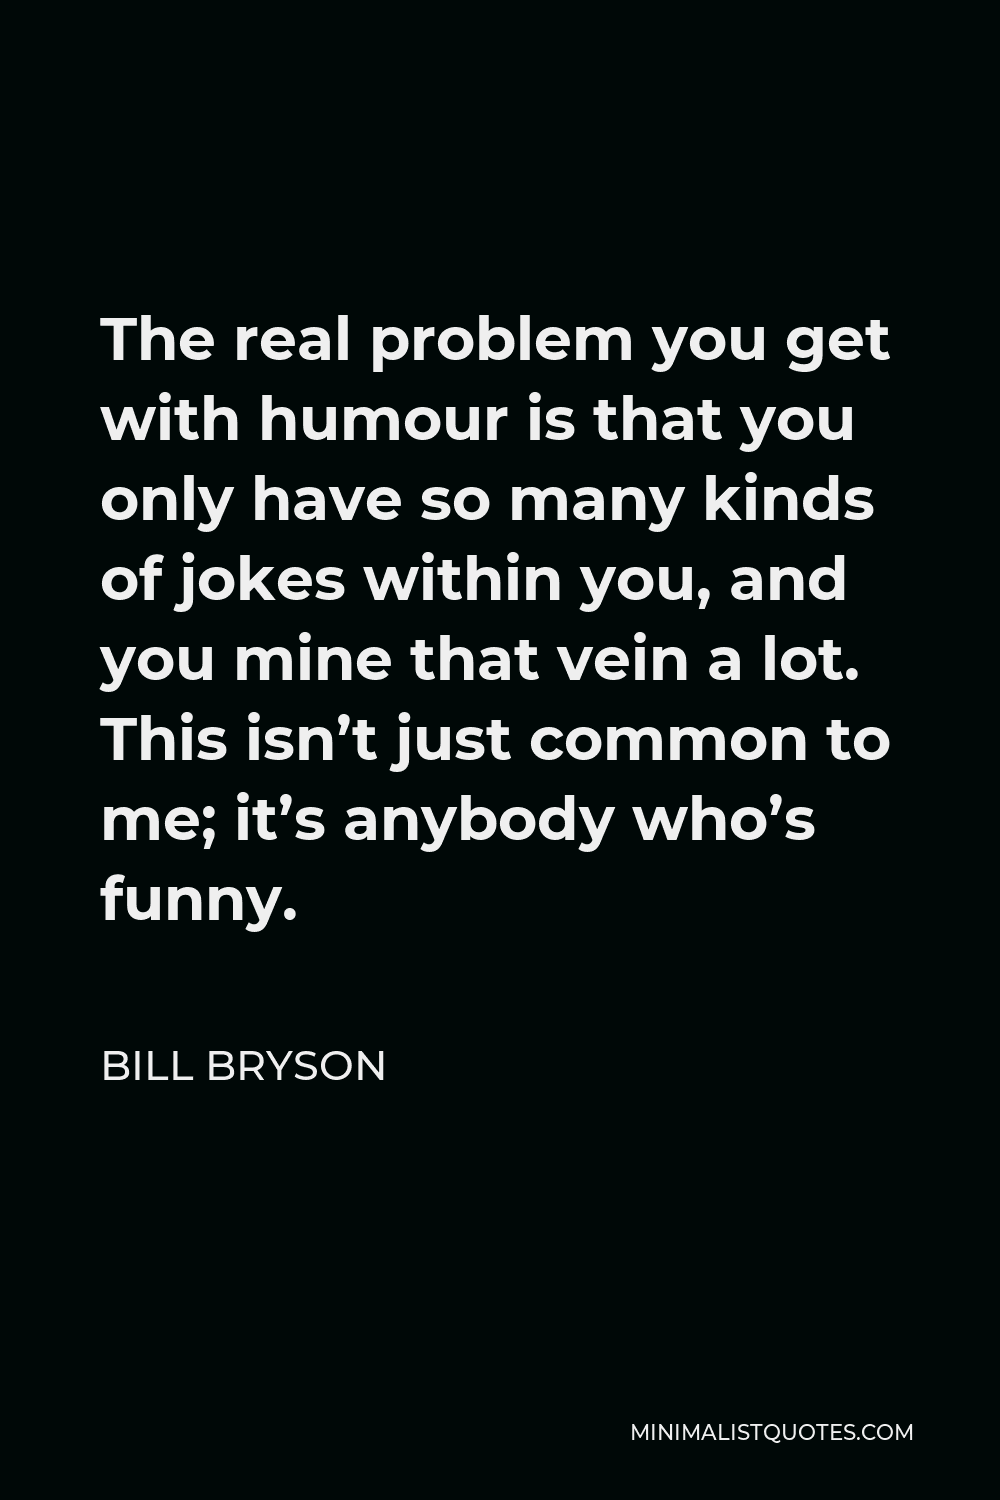 Bill Bryson Quote - The real problem you get with humour is that you only have so many kinds of jokes within you, and you mine that vein a lot. This isn’t just common to me; it’s anybody who’s funny.